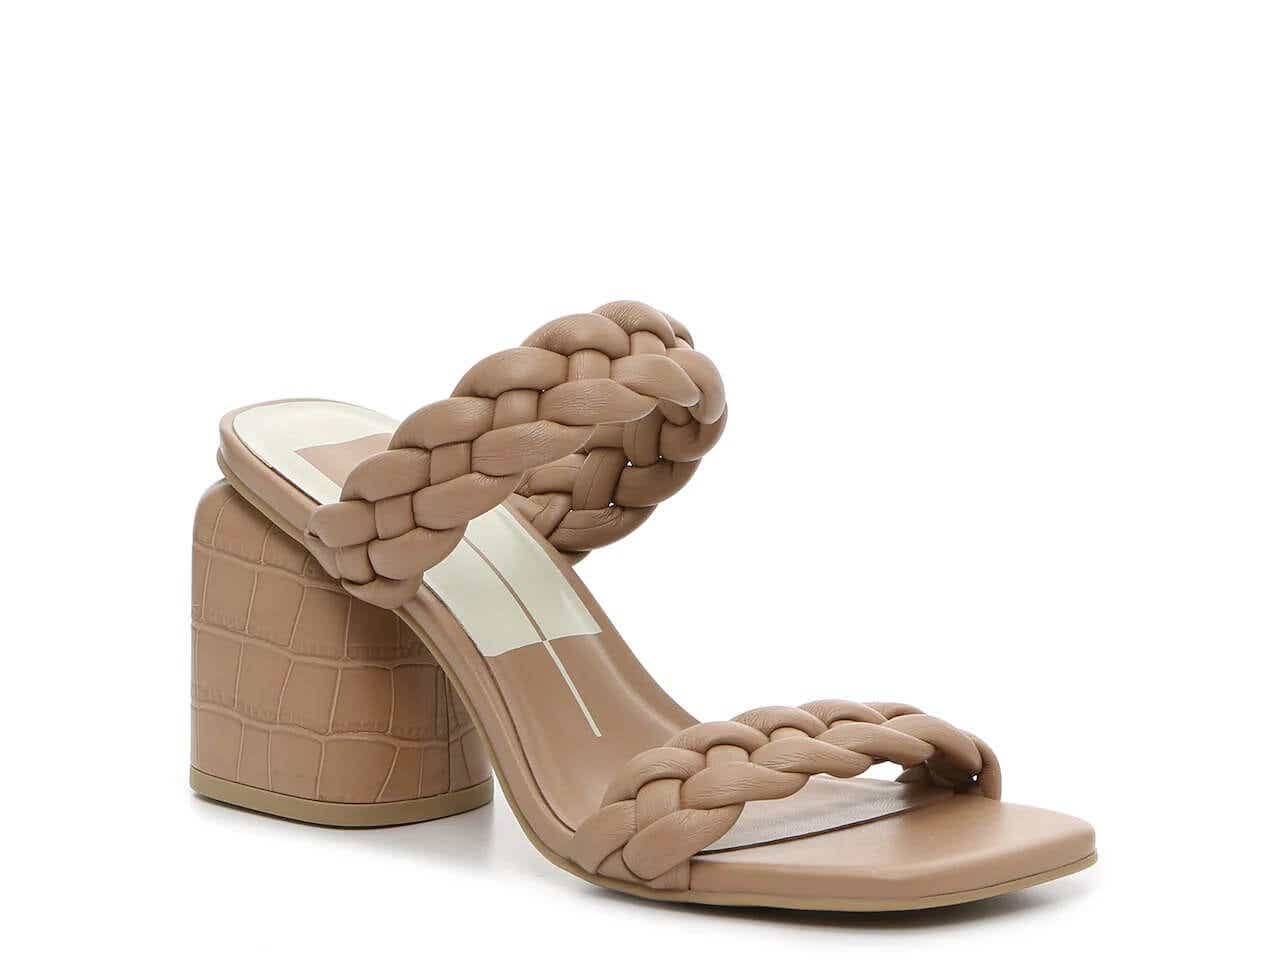 braided sandals from dolce vita